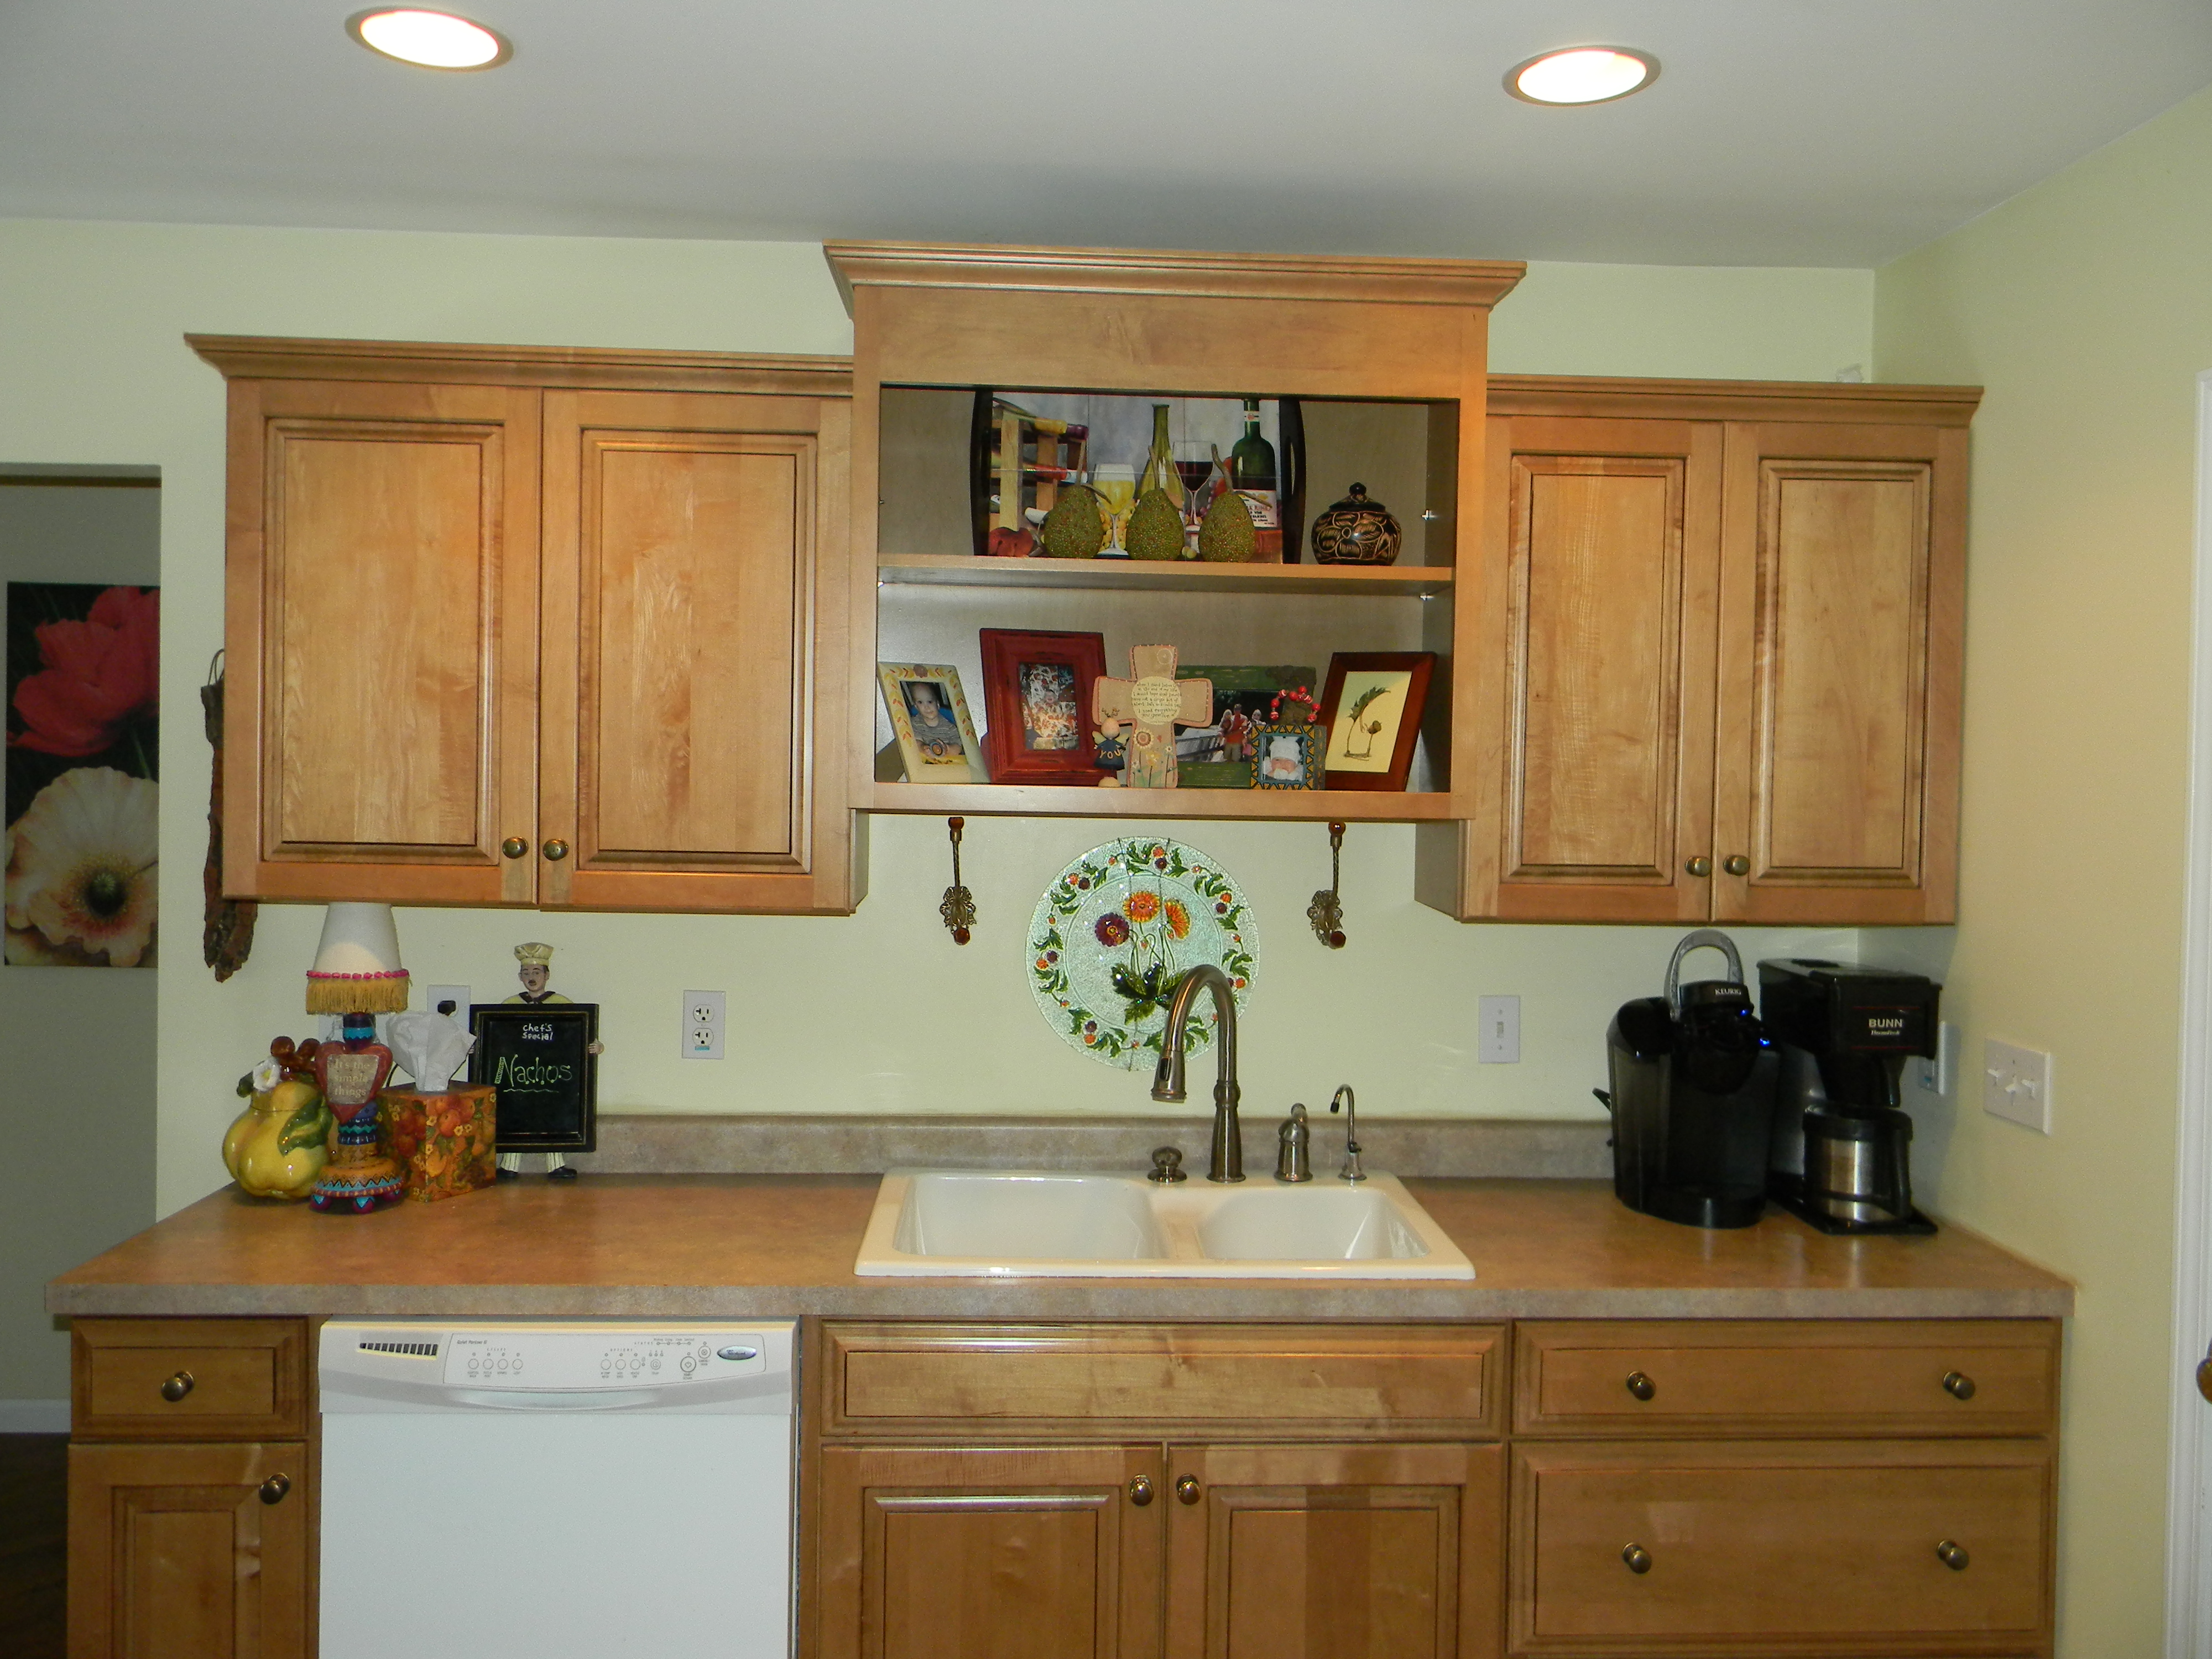 Decorating Above Kitchen Cabinets- Before and After Pictures and Tips